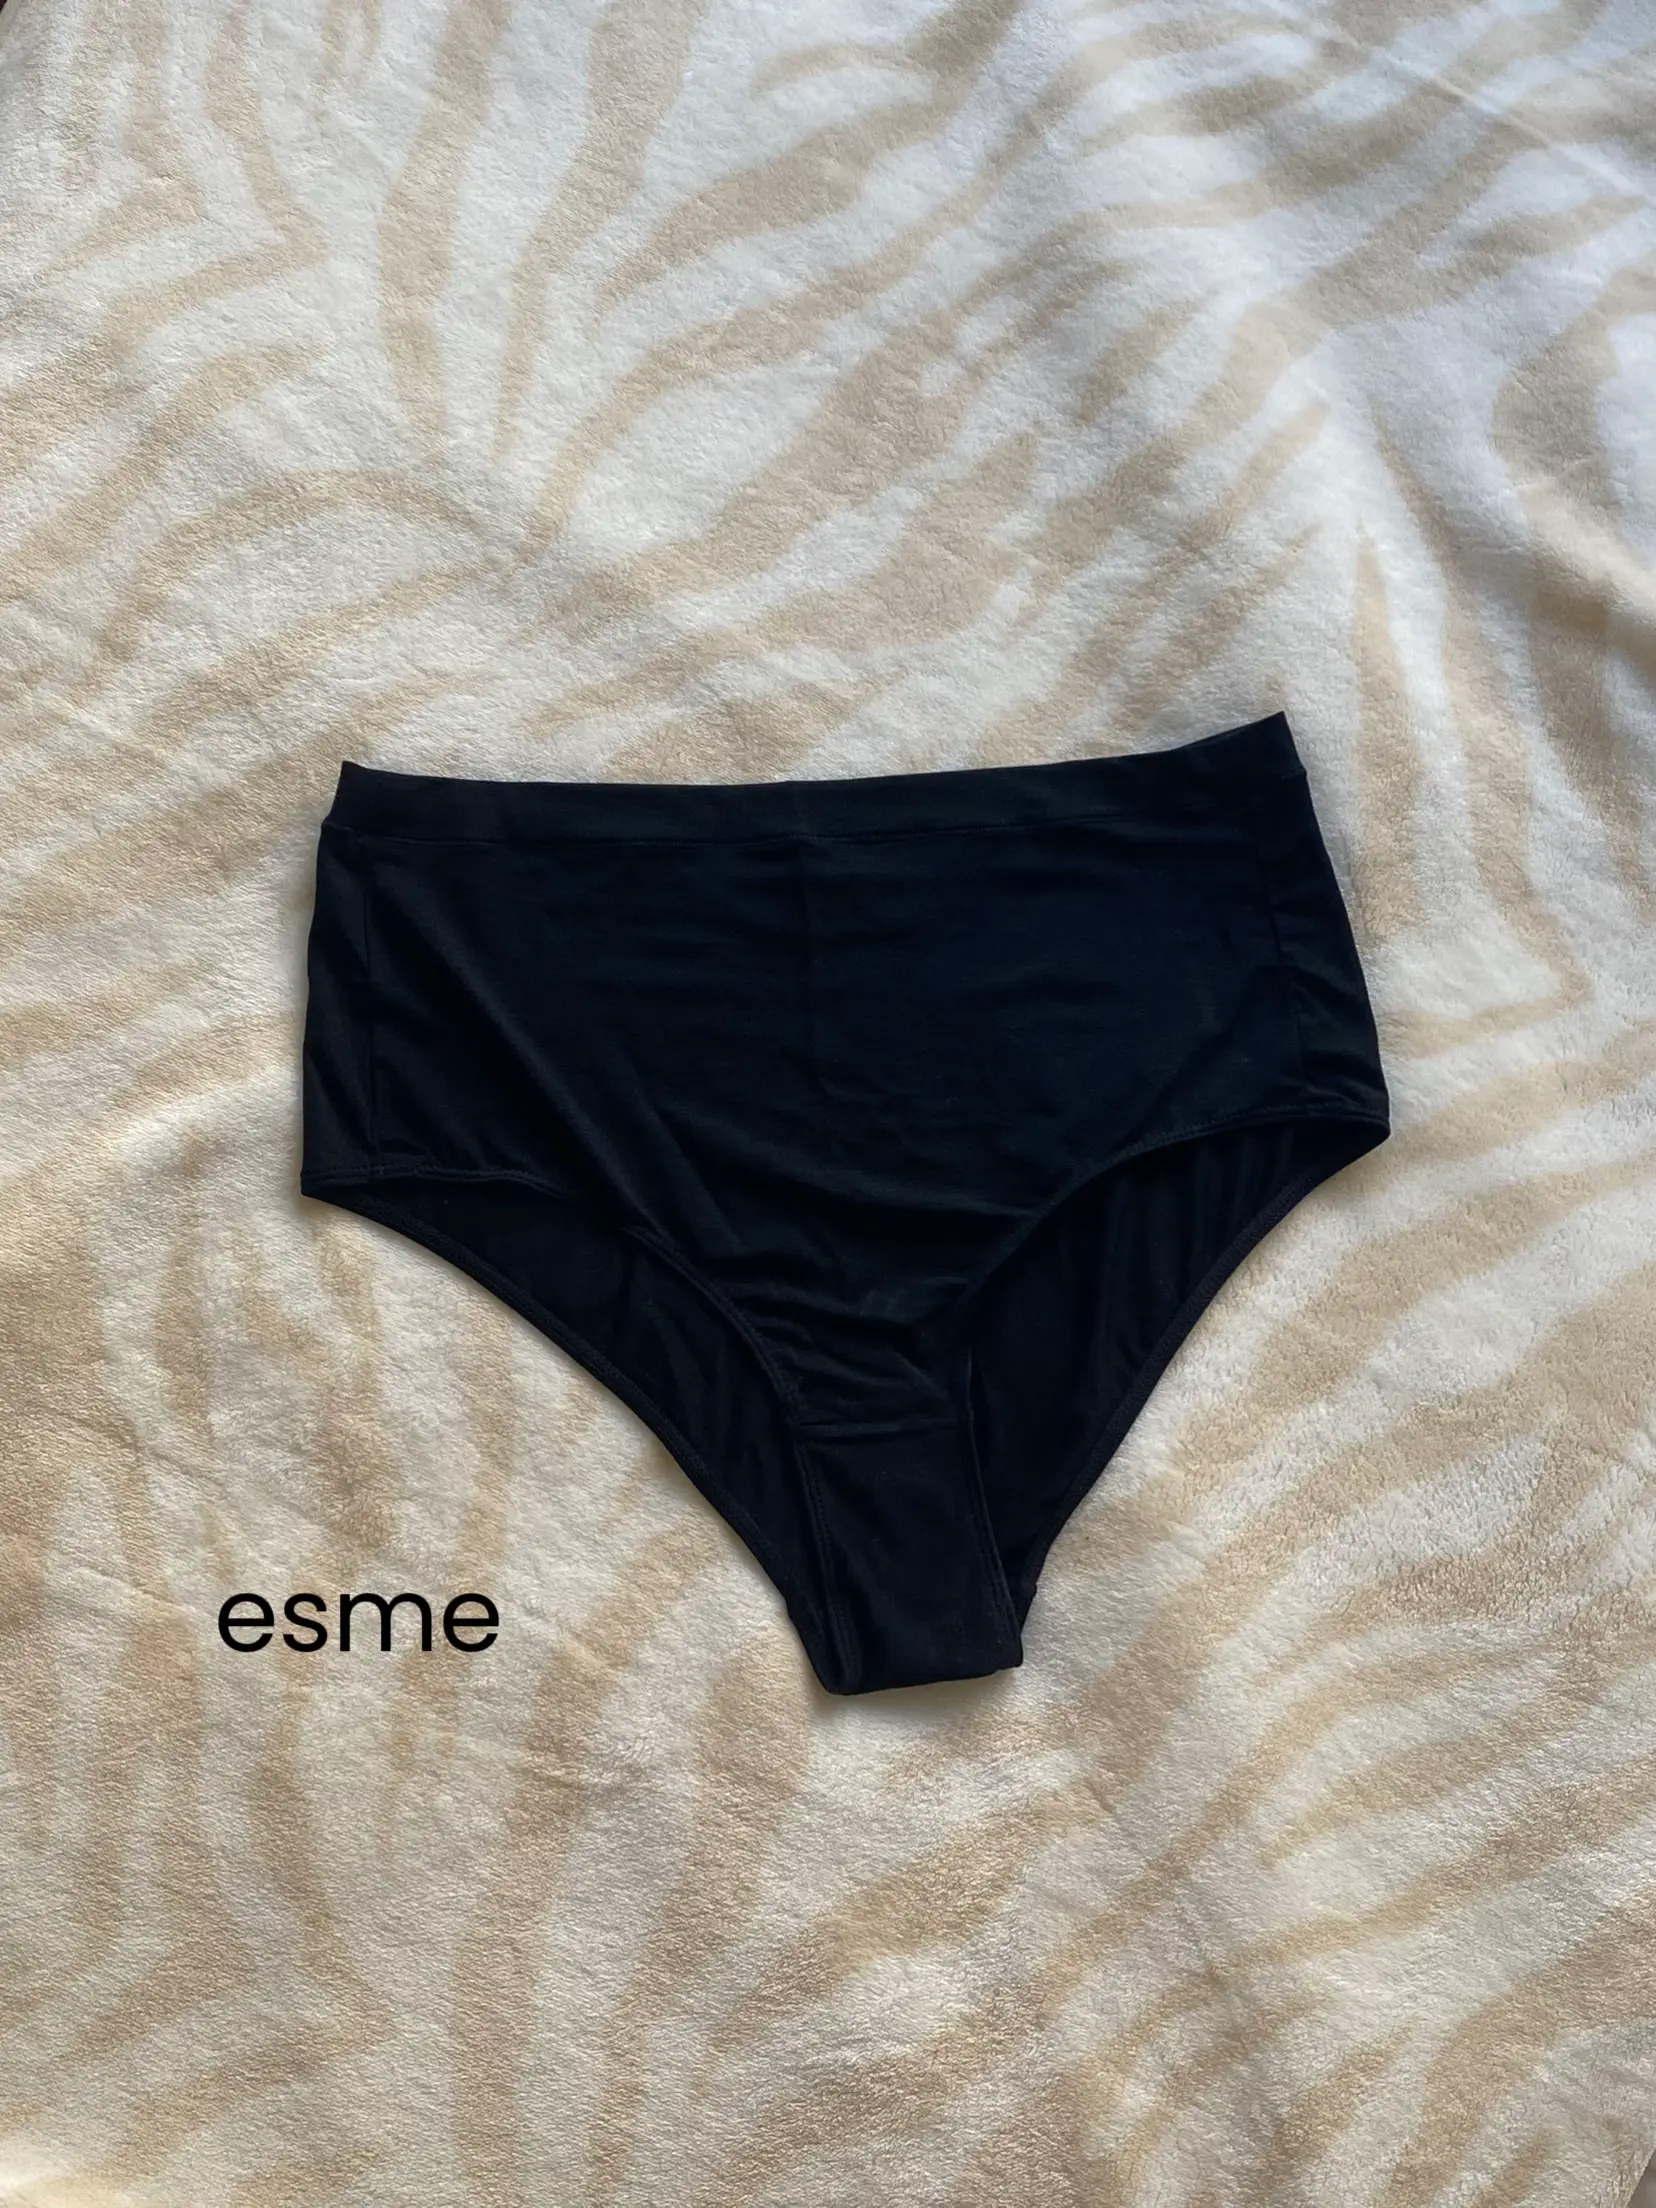 Esme Women's 2-Pack Panty Underwear Small 1-3 Black at